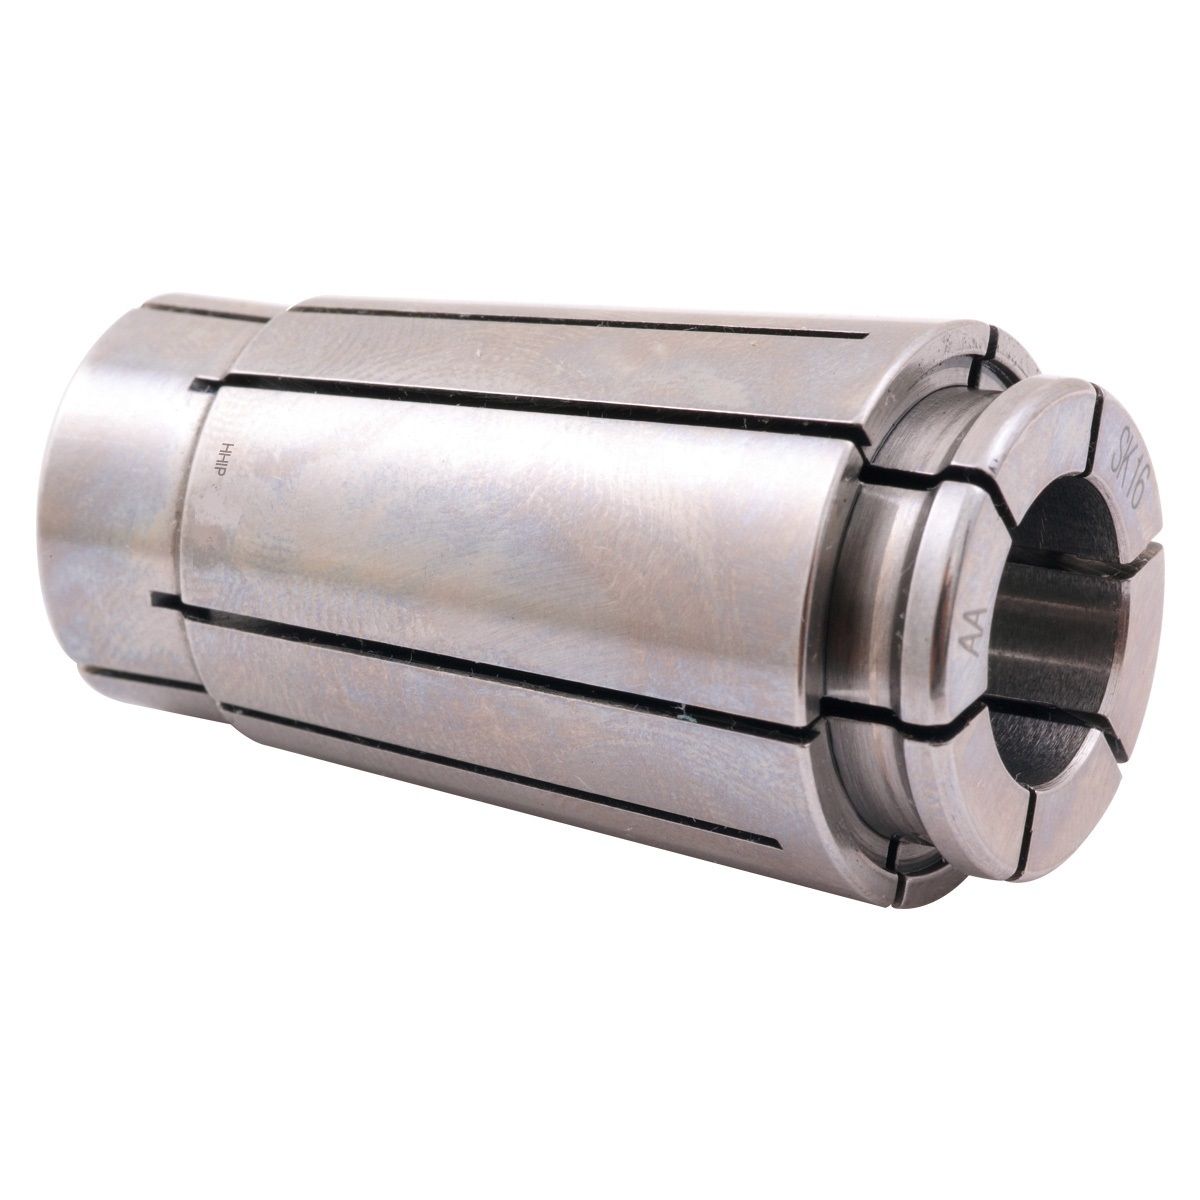 PRO-SERIES 1/8" SK16 LYNDEX STYLE COLLET (3901-5431)